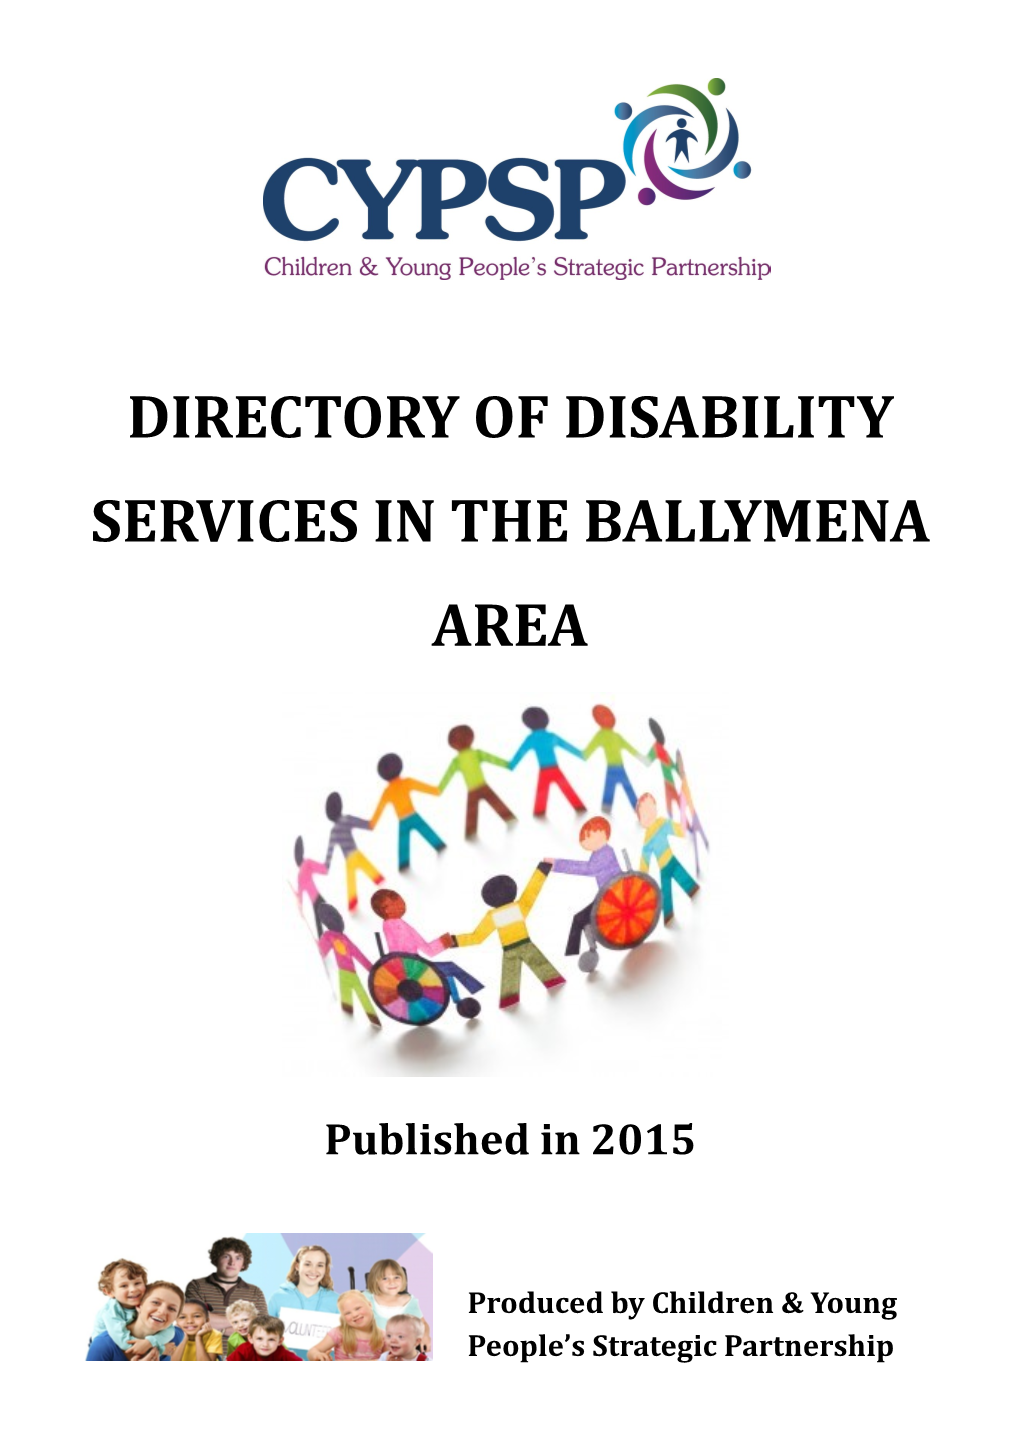 Directory of Disability Services in the Ballymena Area 2015